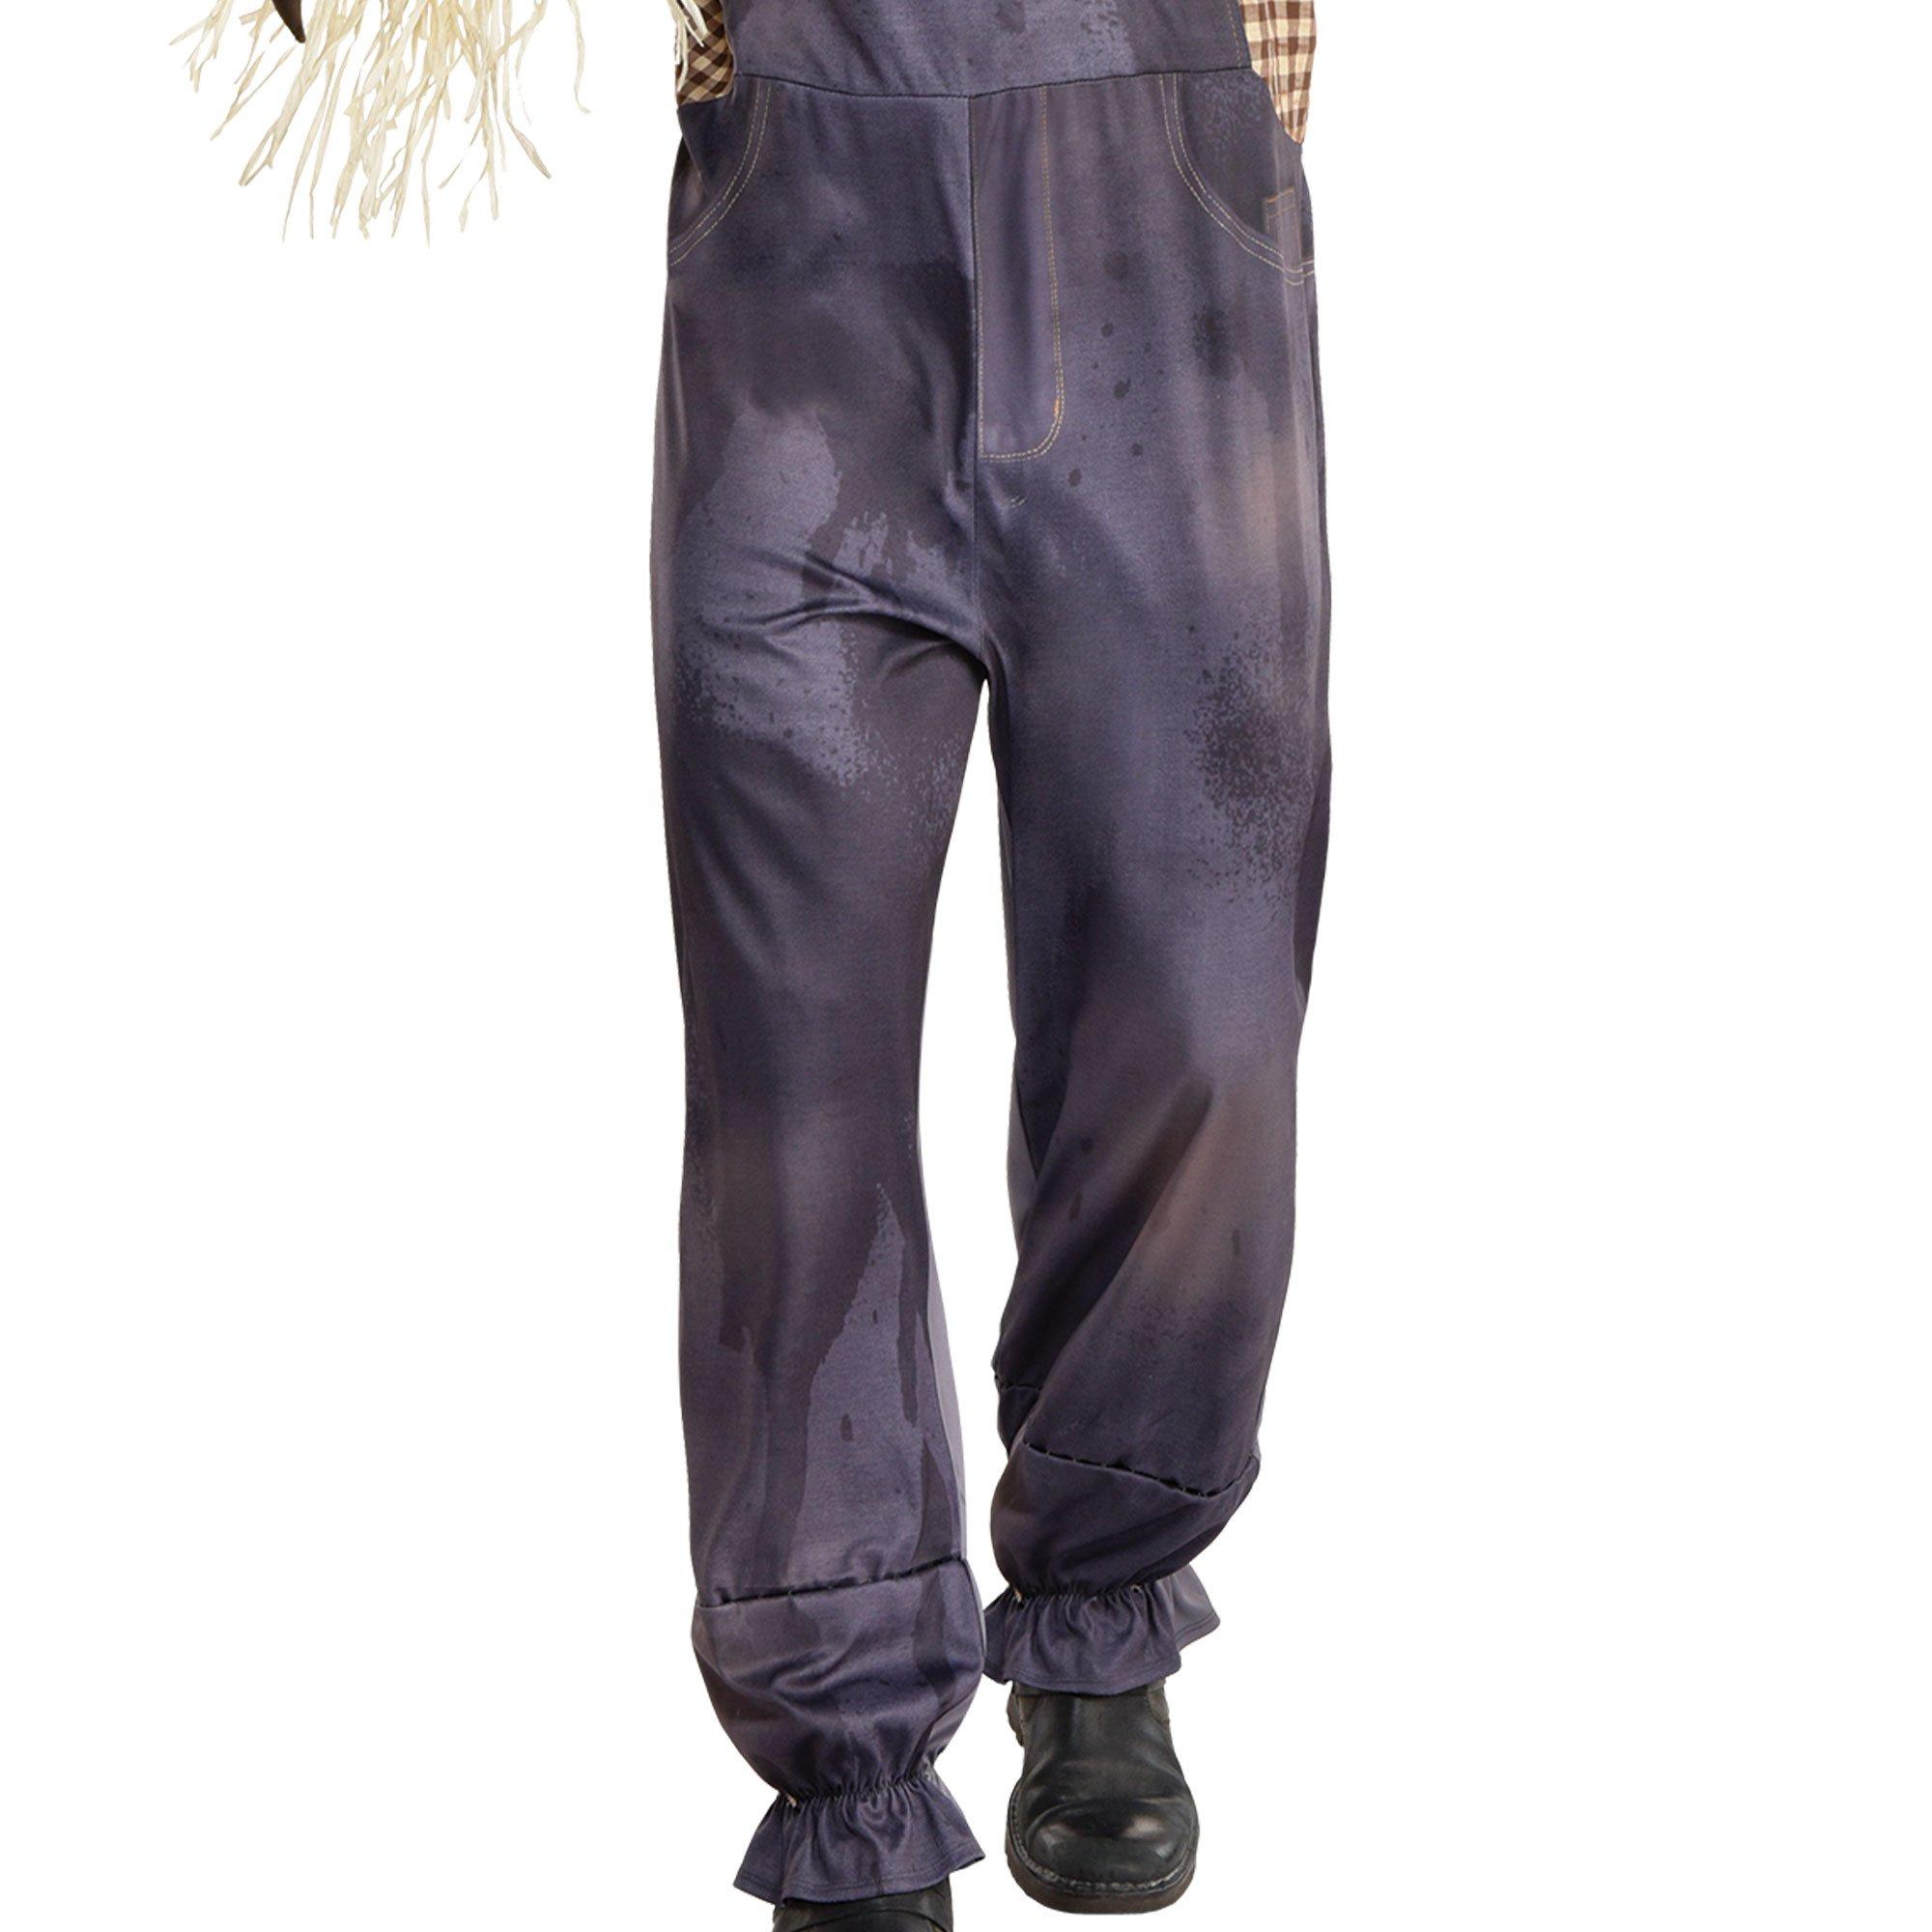 Adult Sinister Scarecrow Costume